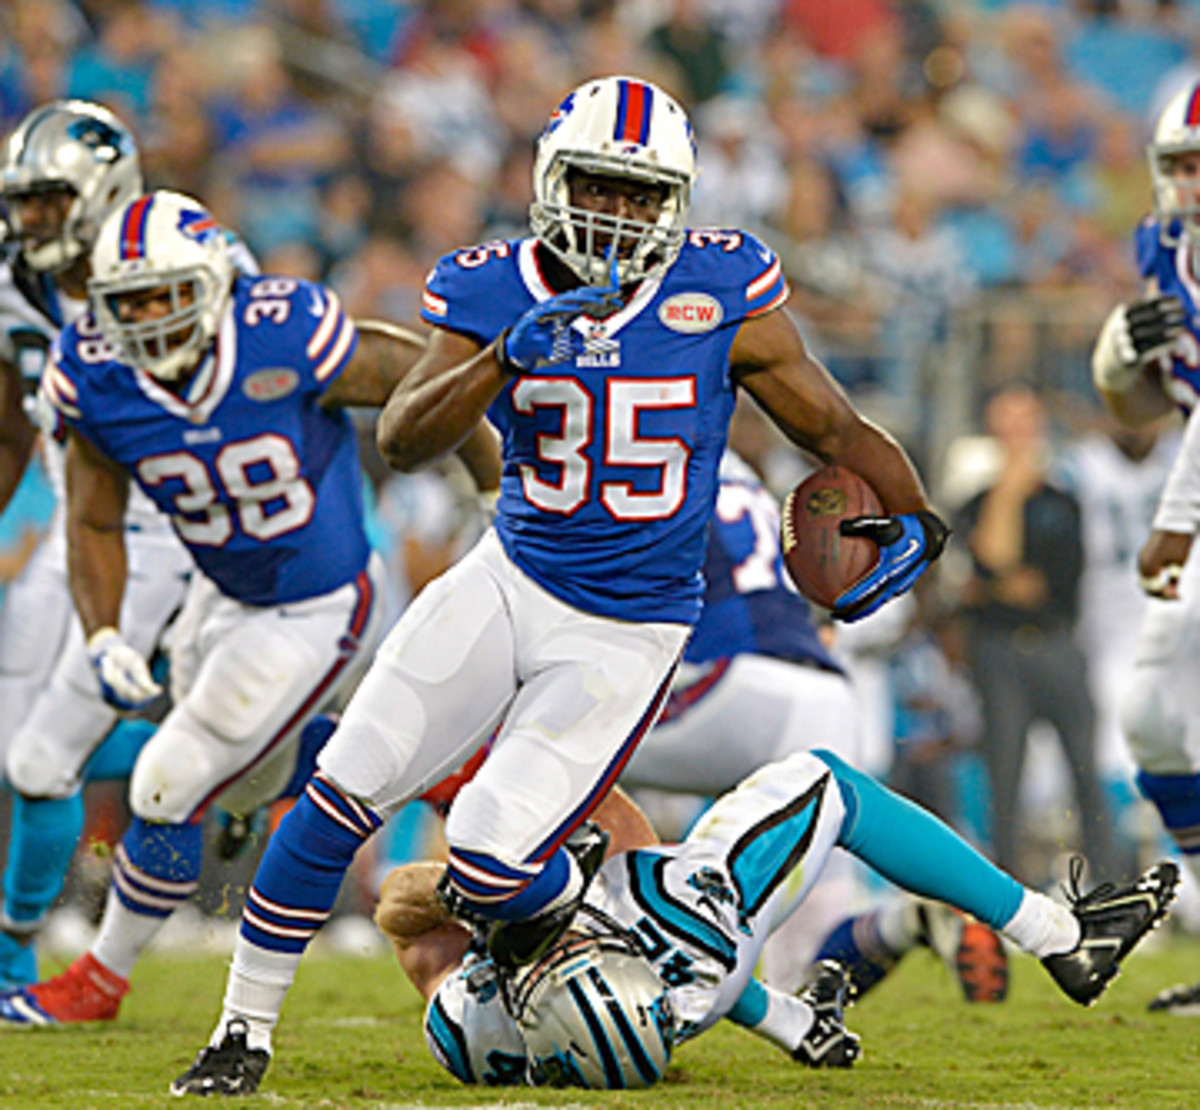 Bryce Brown may not stay buried on the Bills' depth chart for long. (Grant Halverson/Getty Images)